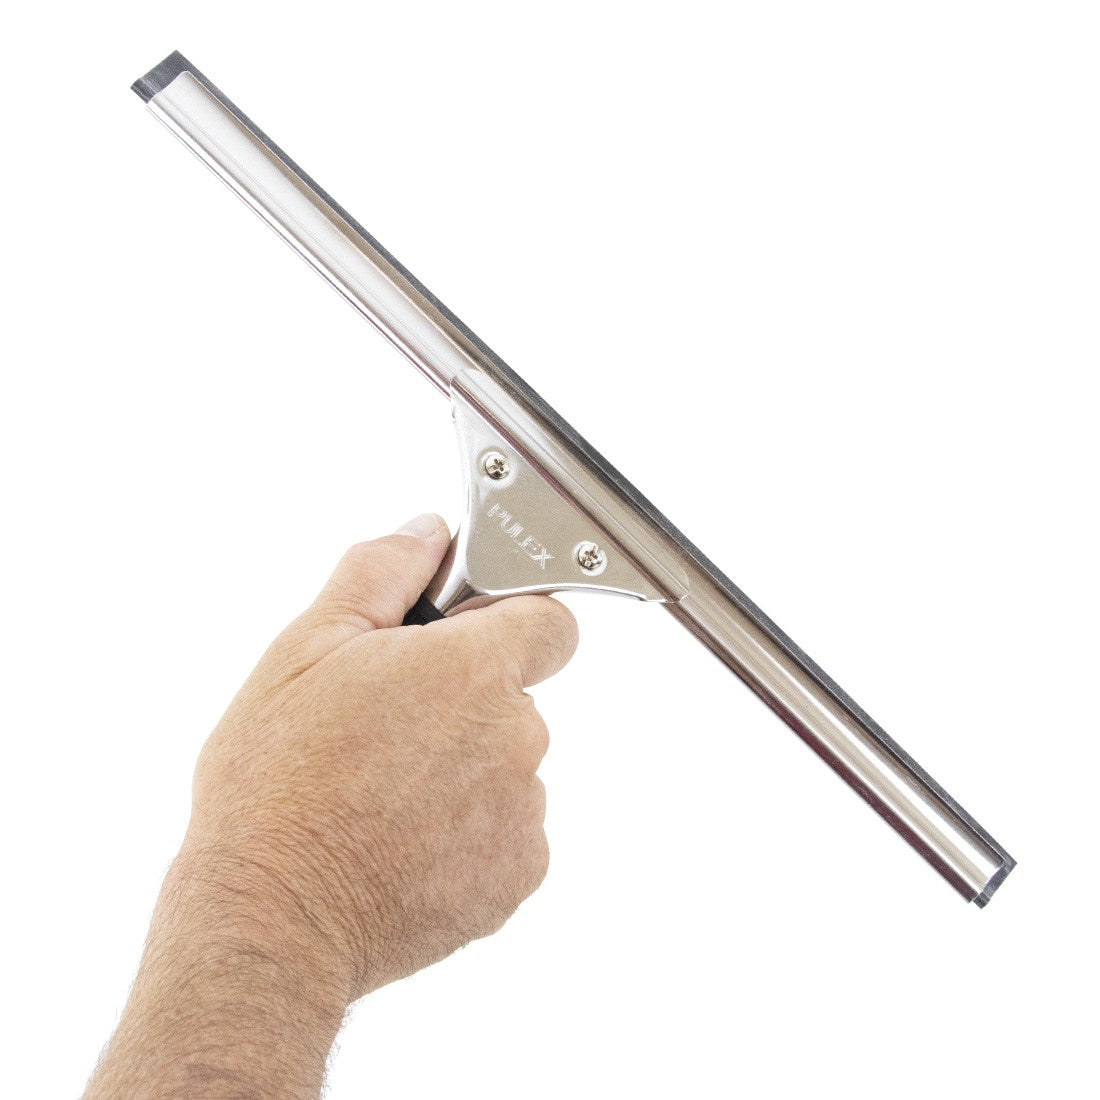 Unger Professional Stainless Steel Heavy-Duty Window and Glass Squeegee 12